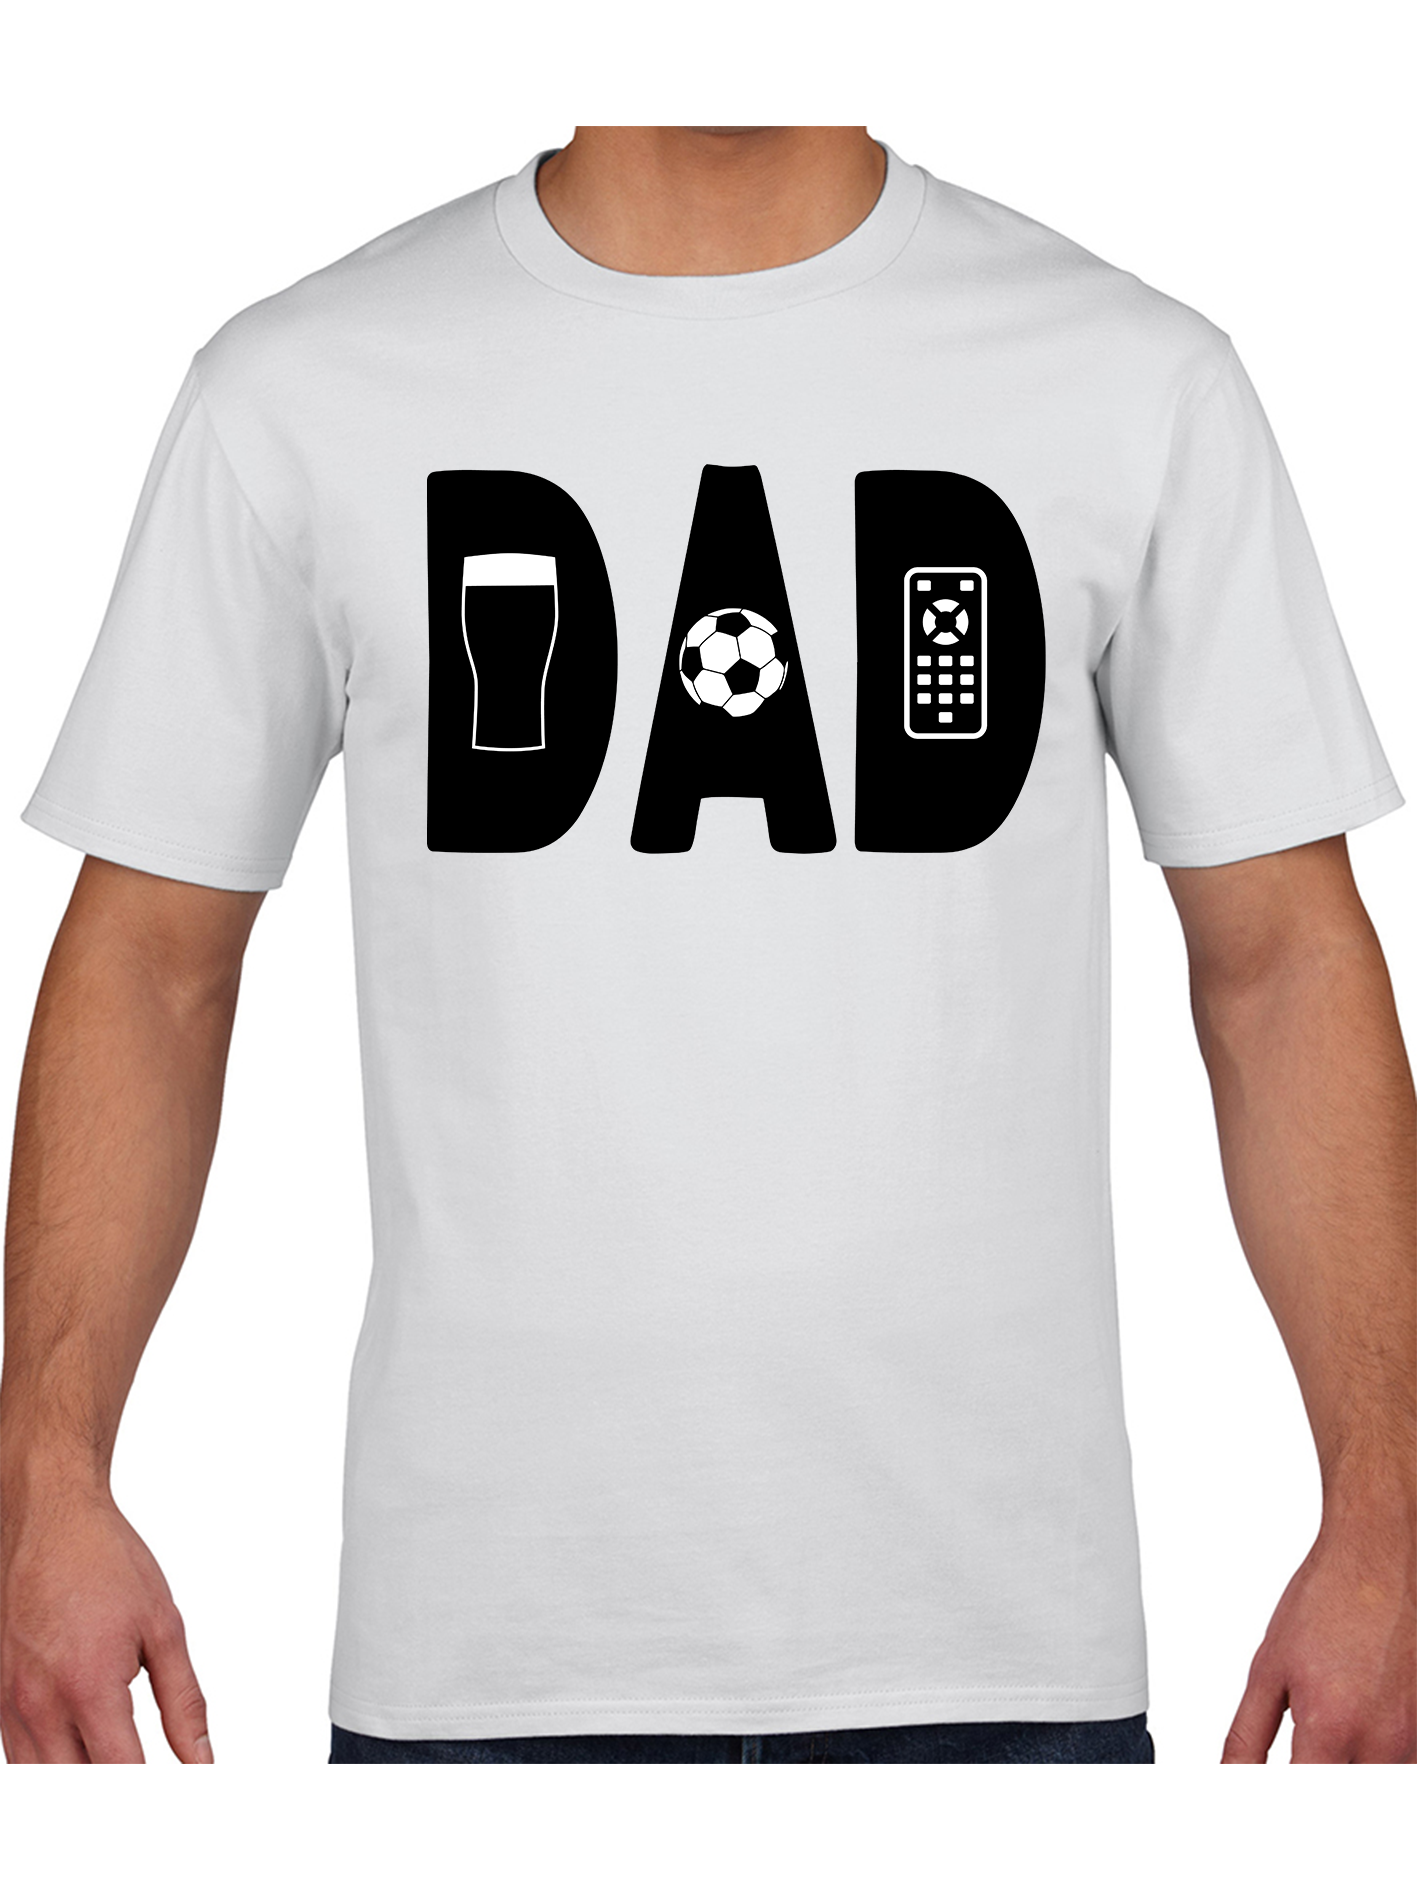 Football Dad T-shirt | Father's Day T-shirt | White